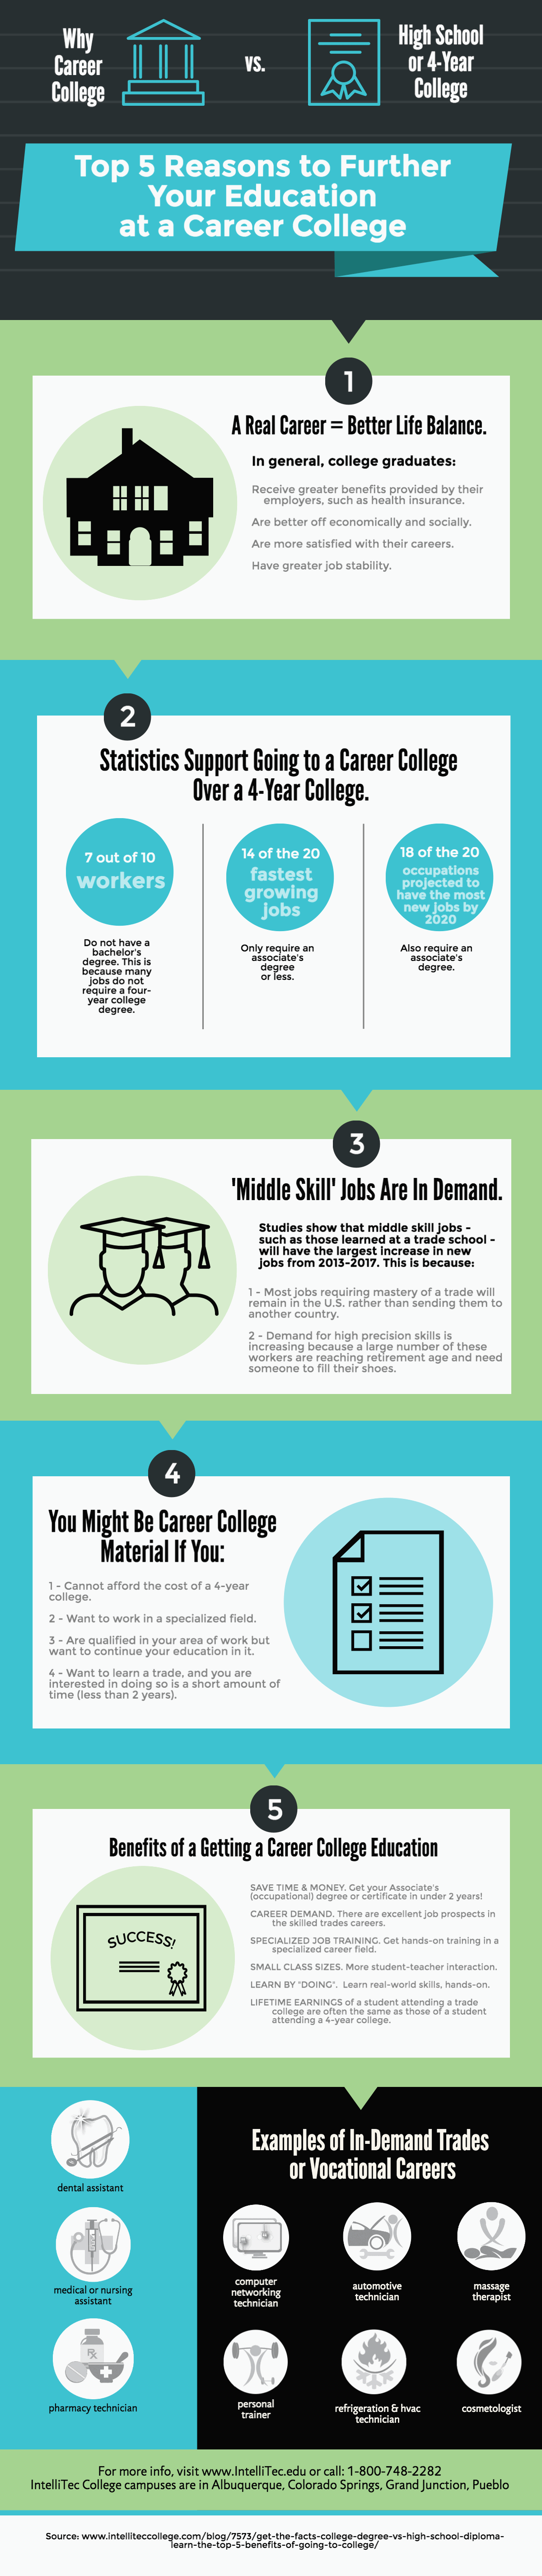 Top 5 Reasons to Further Your Education at a Career College